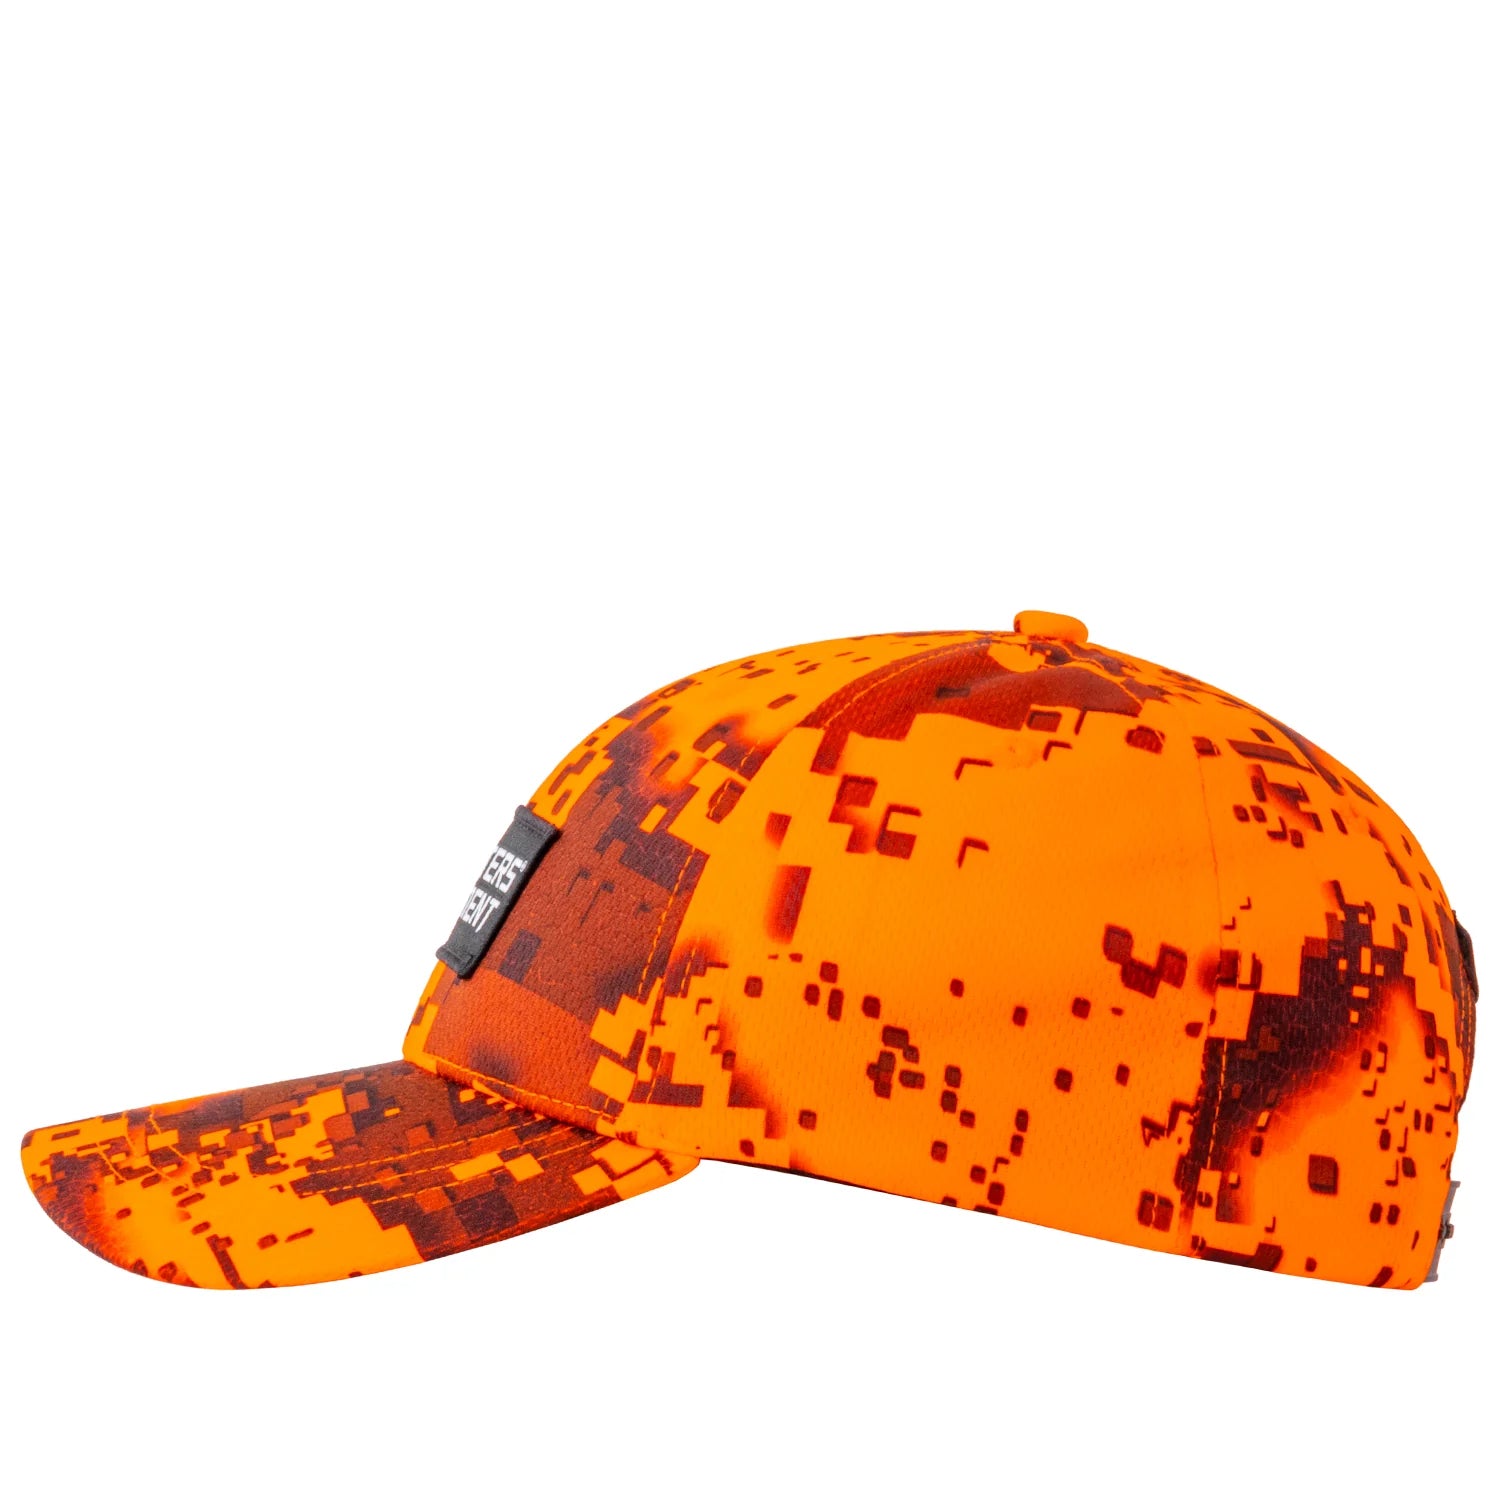 Hunters Element Patch Cap - Desolve Fire -  - Mansfield Hunting & Fishing - Products to prepare for Corona Virus